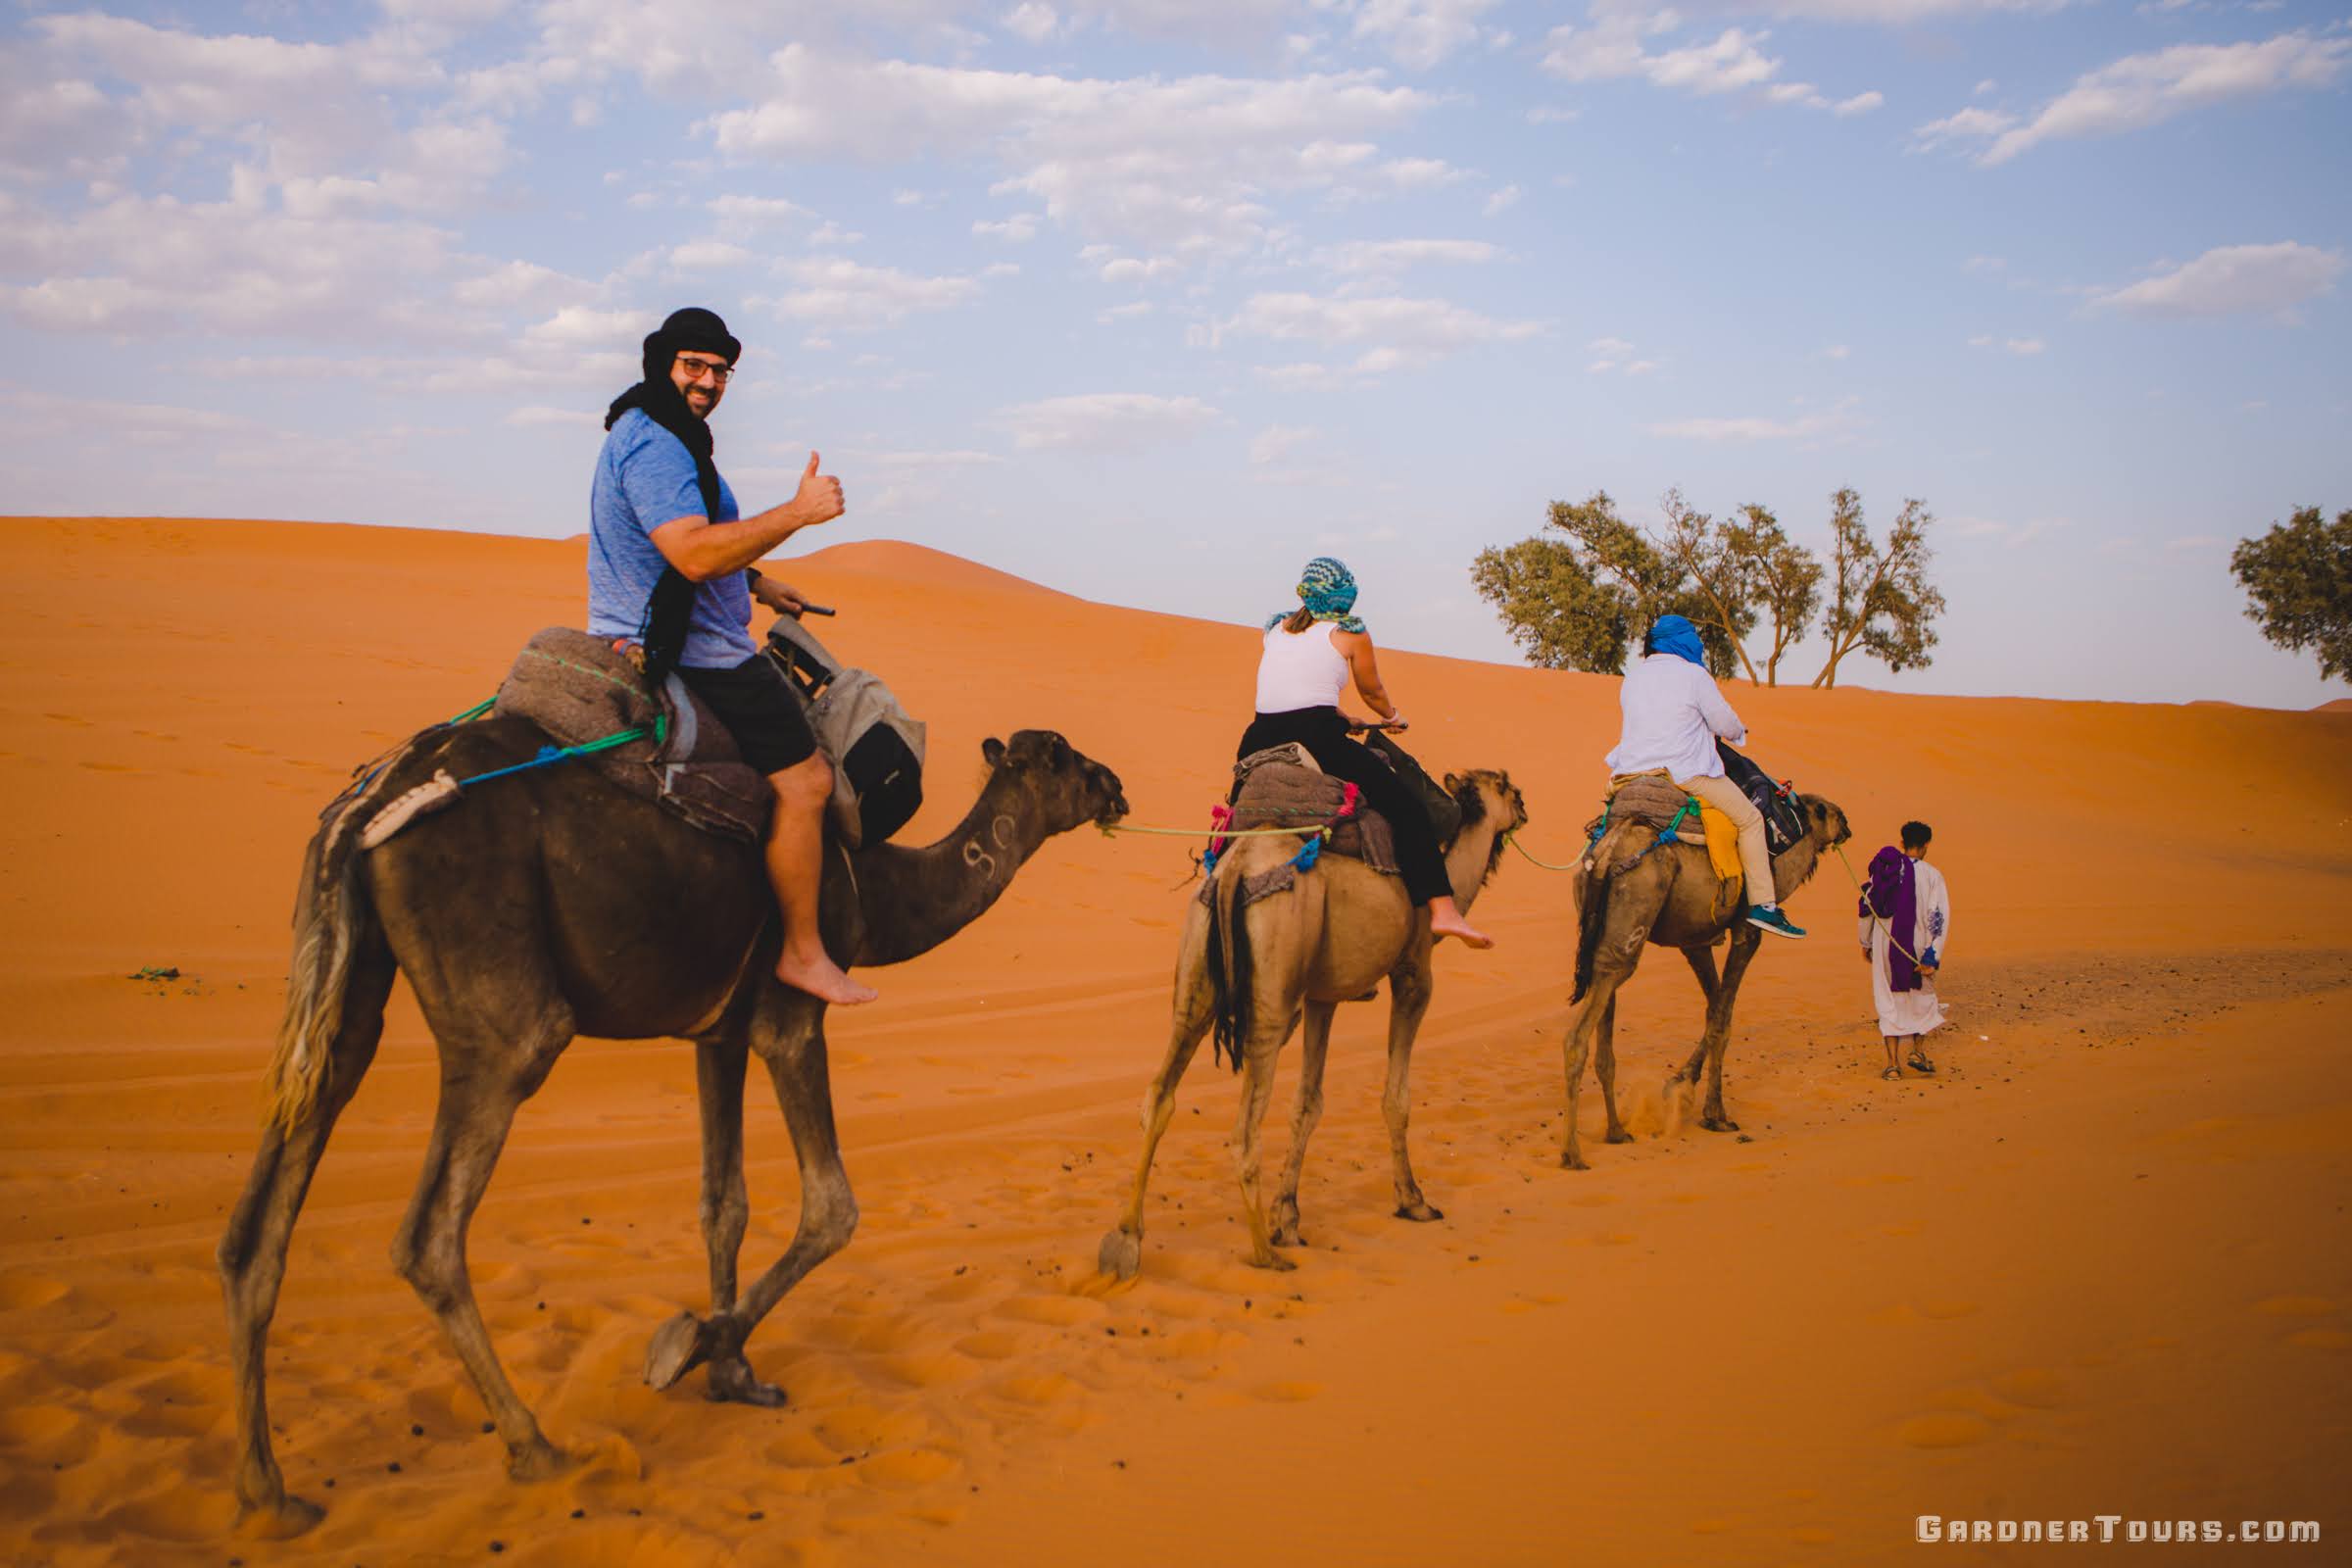 Gardner Tours Owner and Tour Guide Colby Gardner riding camels through the Sahara Desert in Morocco with two of his American travelers